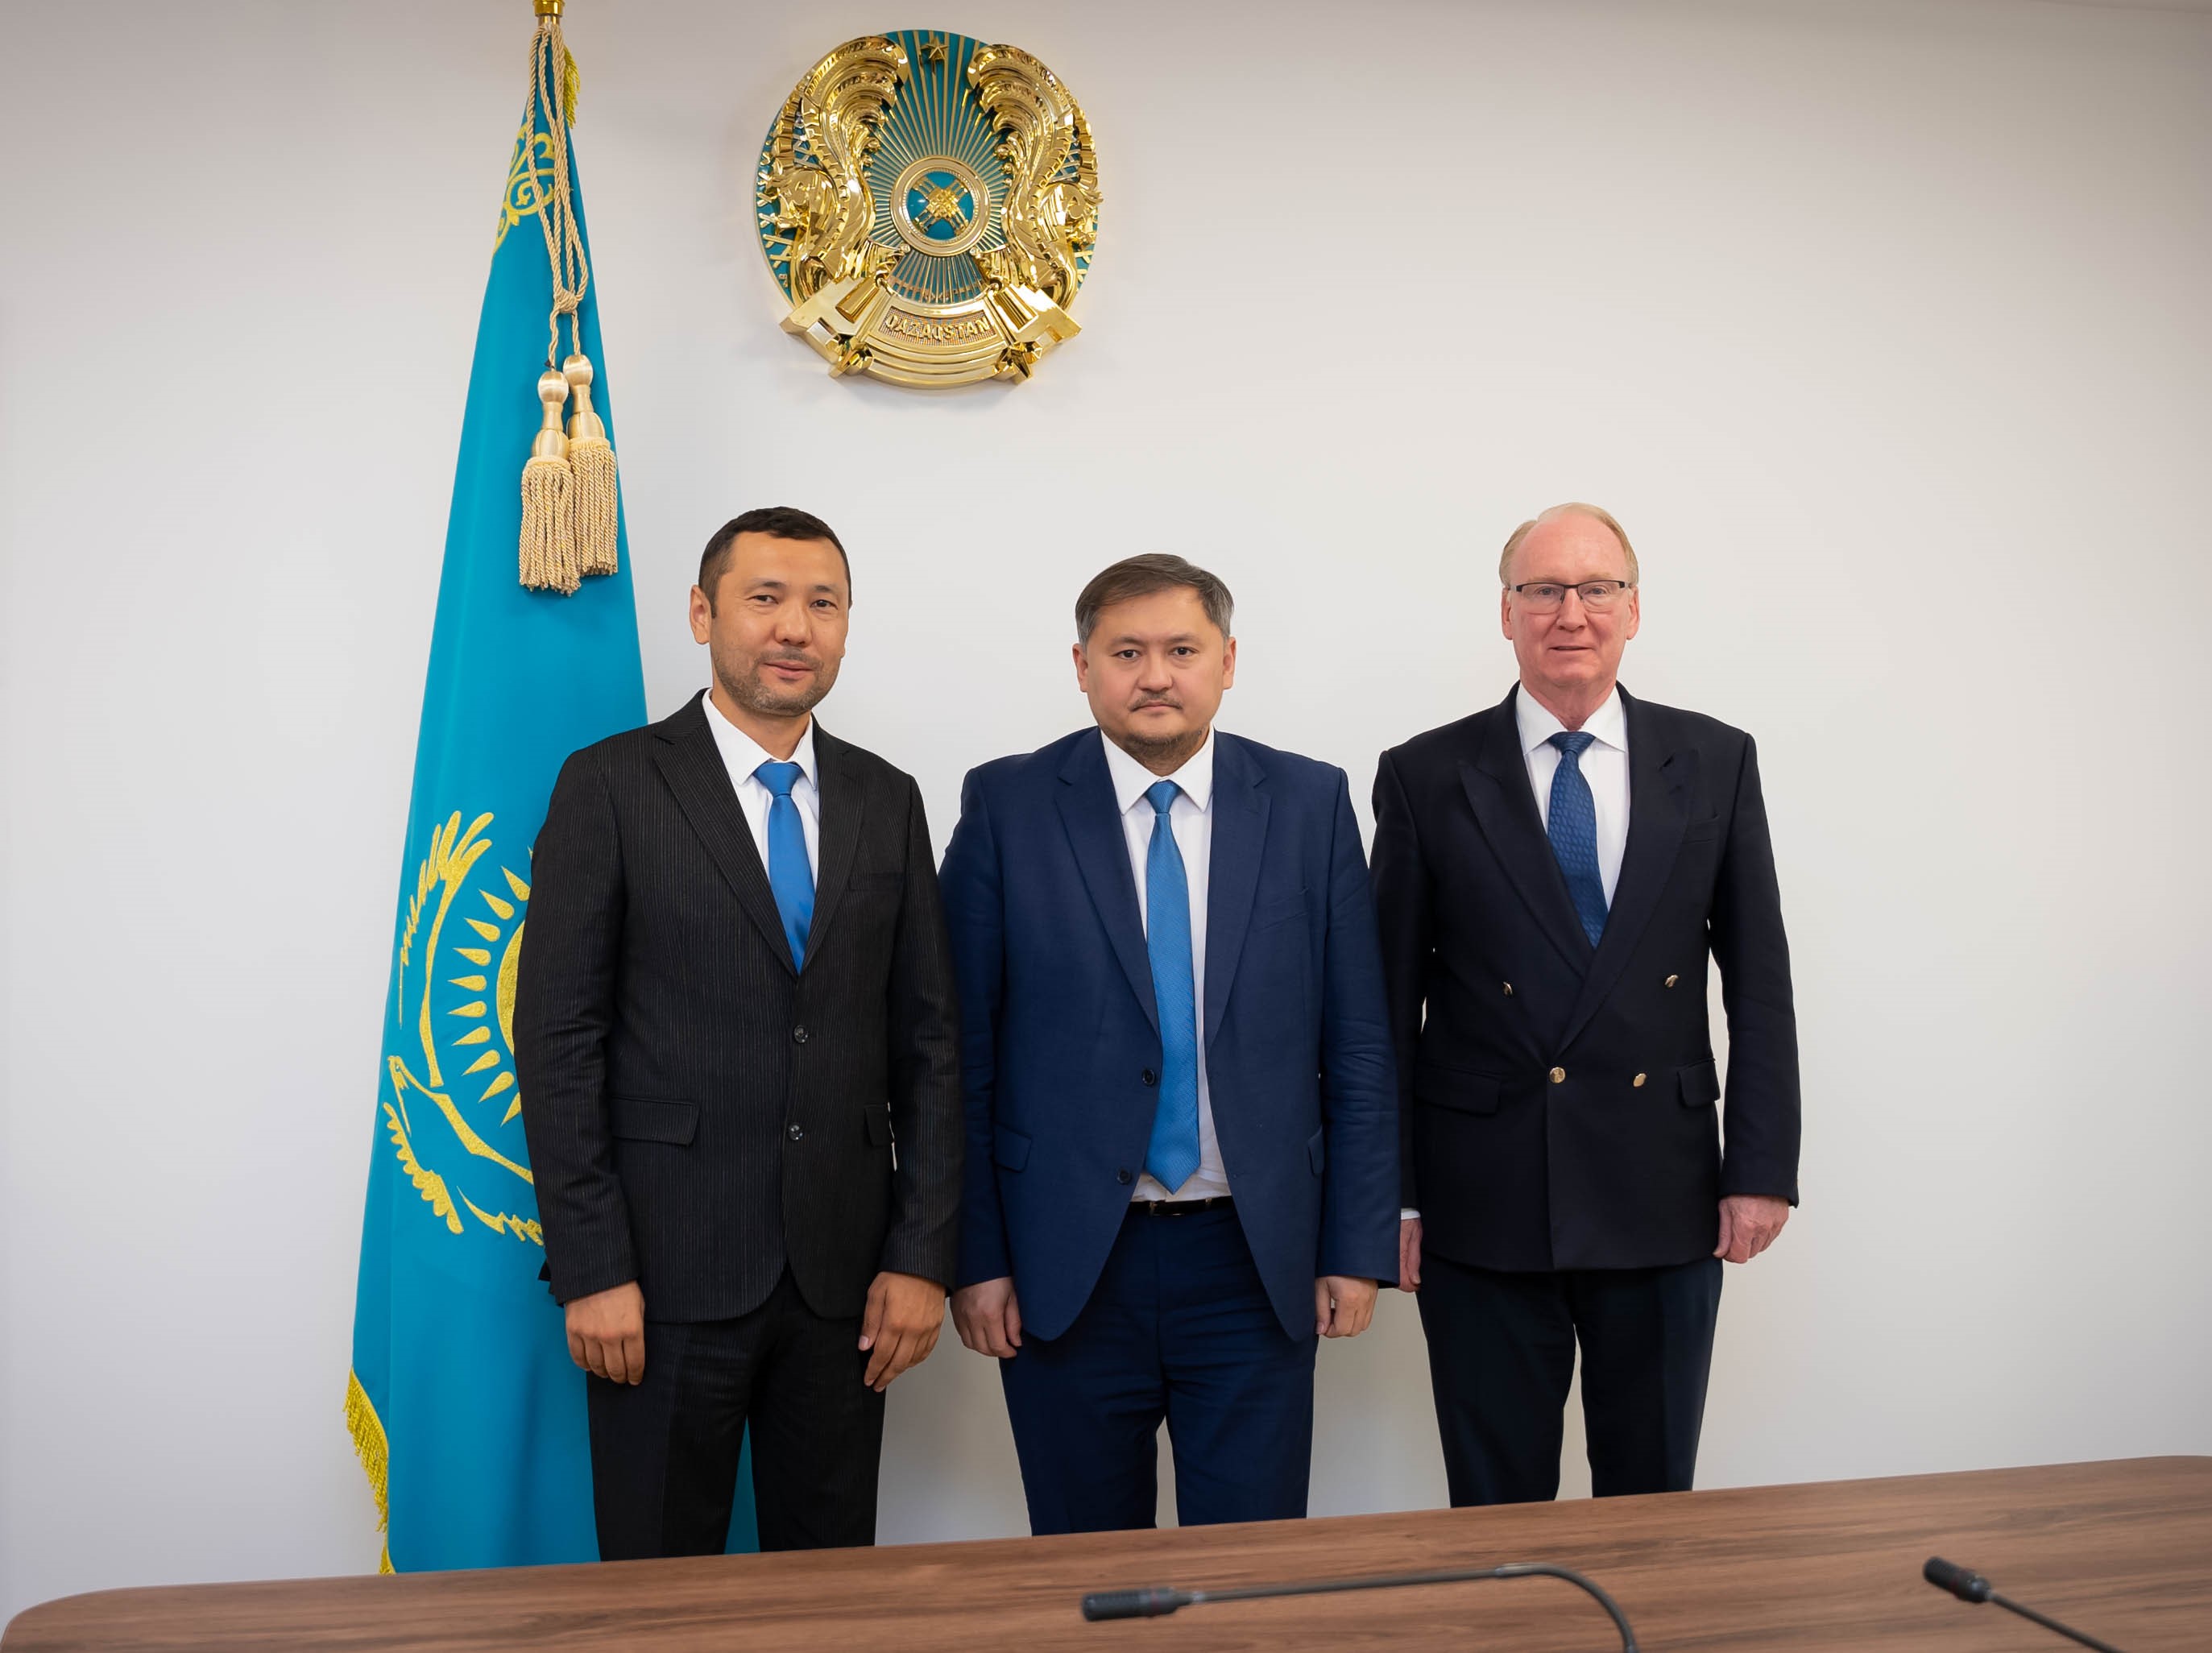 ISTC met with the Minister of Science and Higher Education of the Republic of Kazakhstan